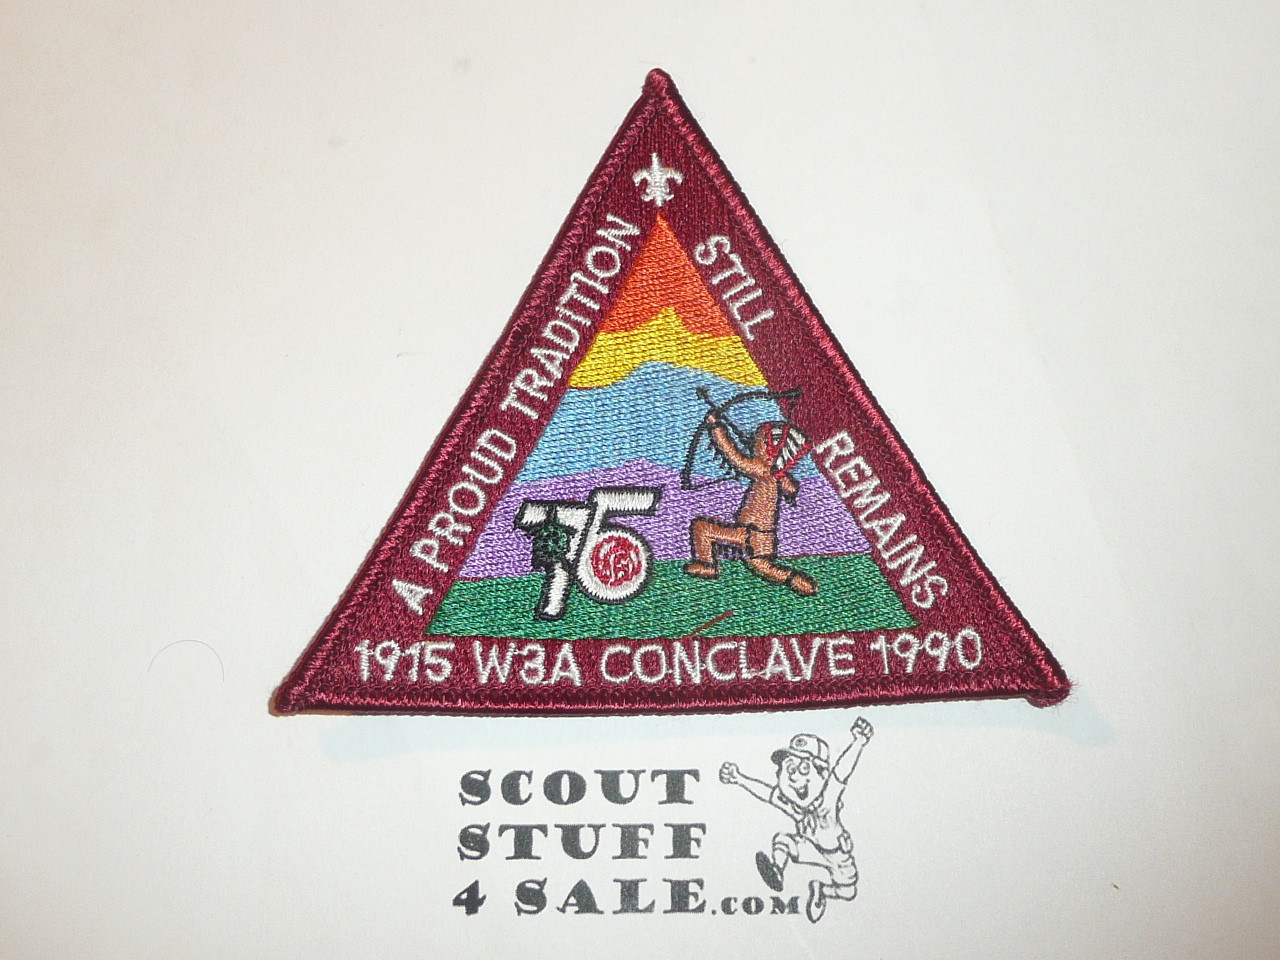 Section W3A 1990 O.A. Conclave Patch - Scout